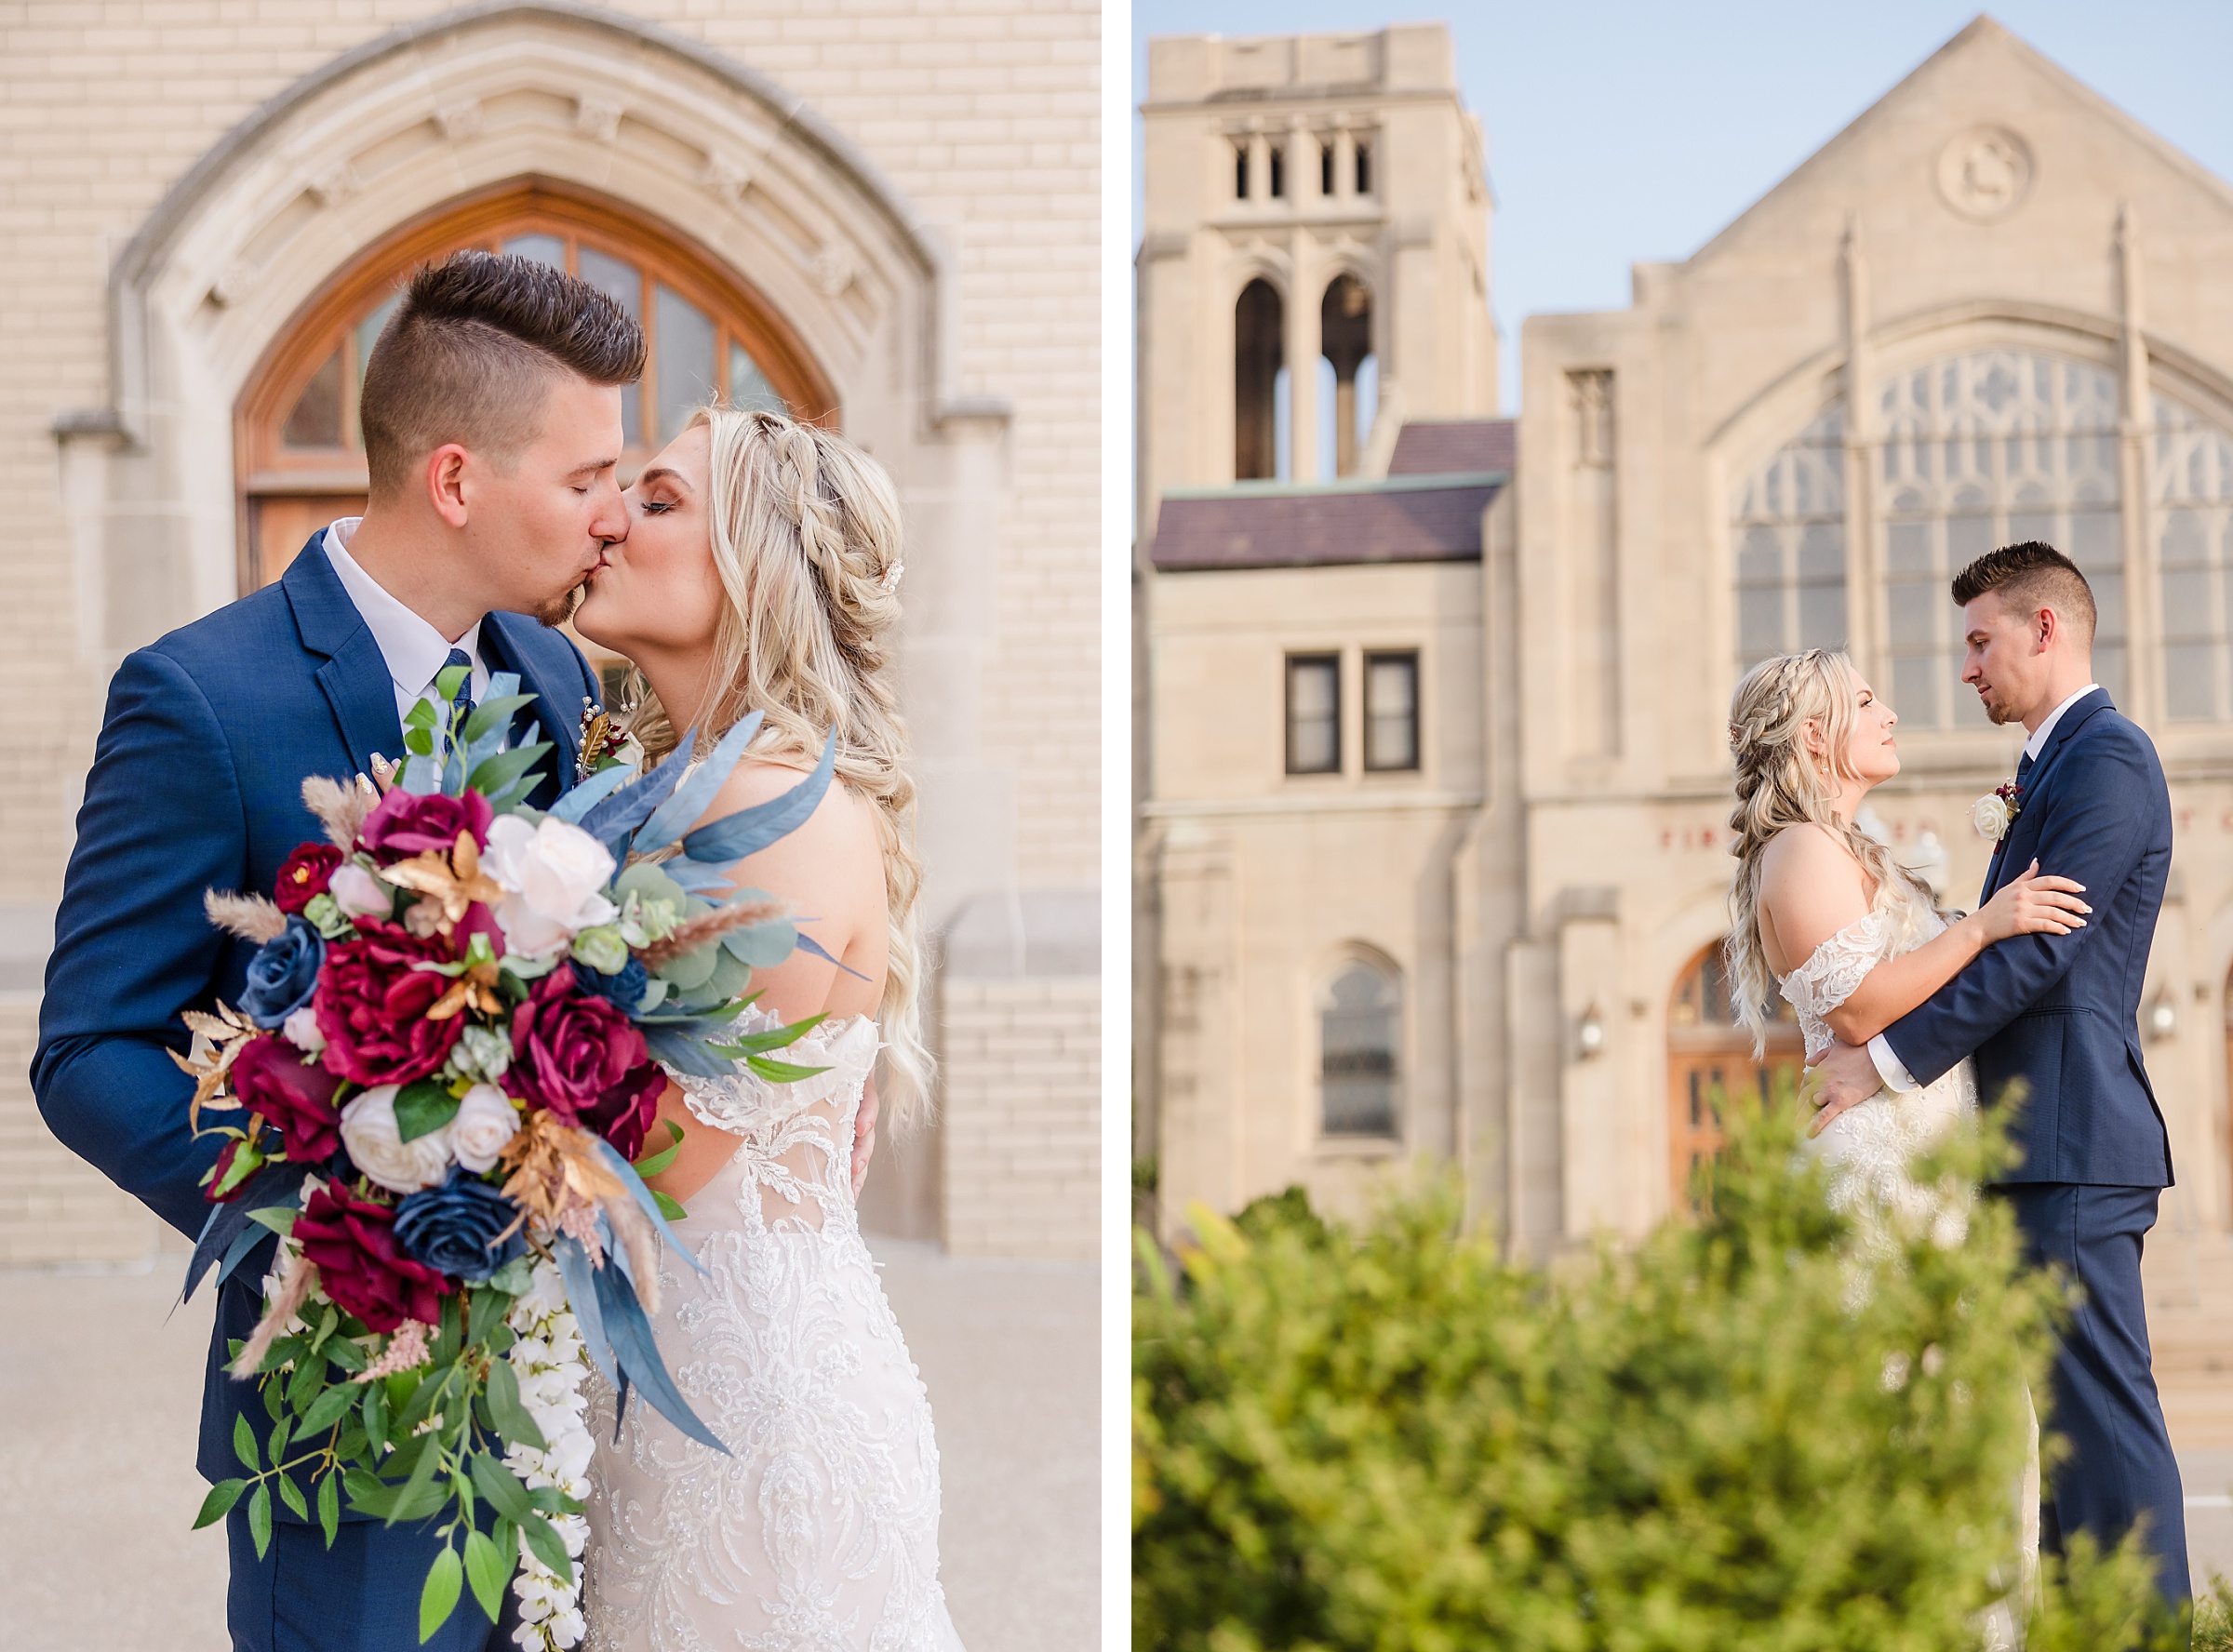 Bride and Groom embrace after their wedding ceremony at the First United Methodist Church in Peoria, Illinois